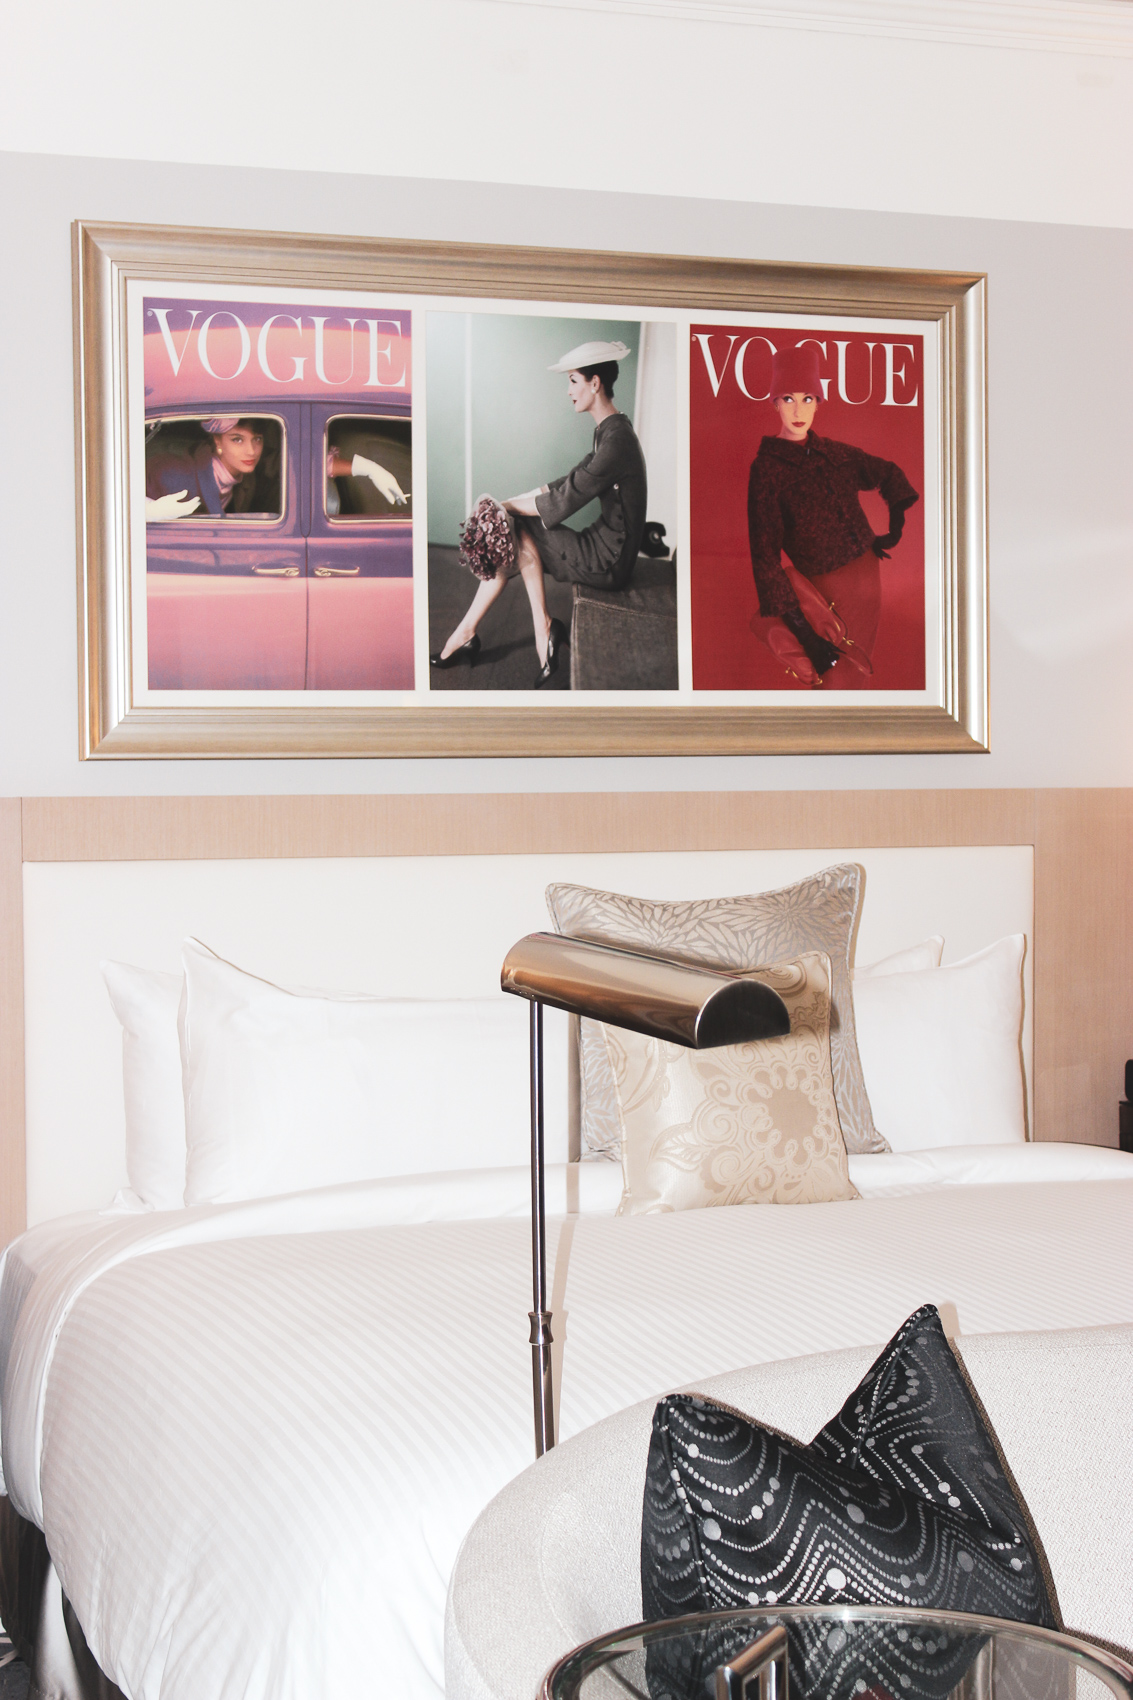 Lowes Vogue Hotel Montreal Review (1)